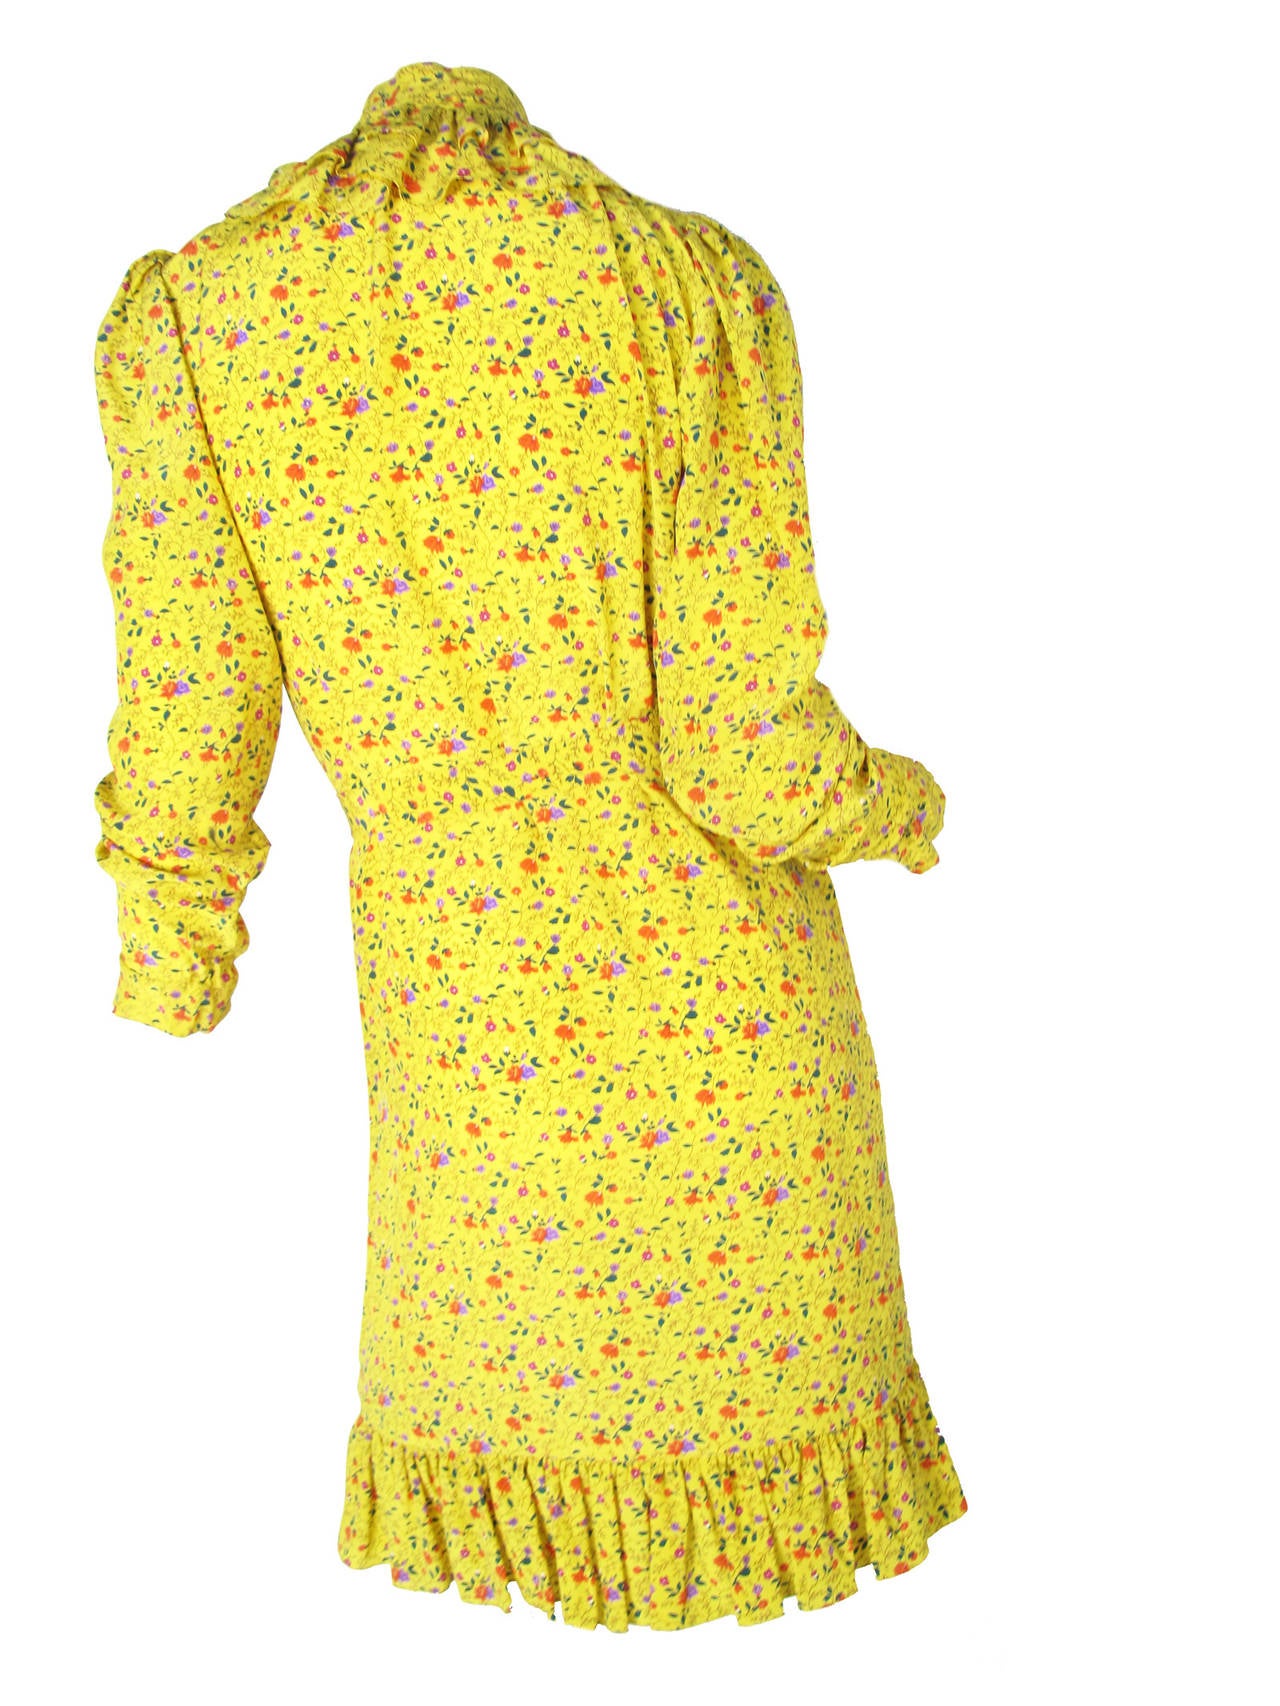 Ungaro yellow floral print silk peasant dress. Elastic at wrist. Two side pockets.  Removable belt for waist. Ties at collar. Ruffle at collar, cuffs and hem.  Condition: Excellent. Size 6

37